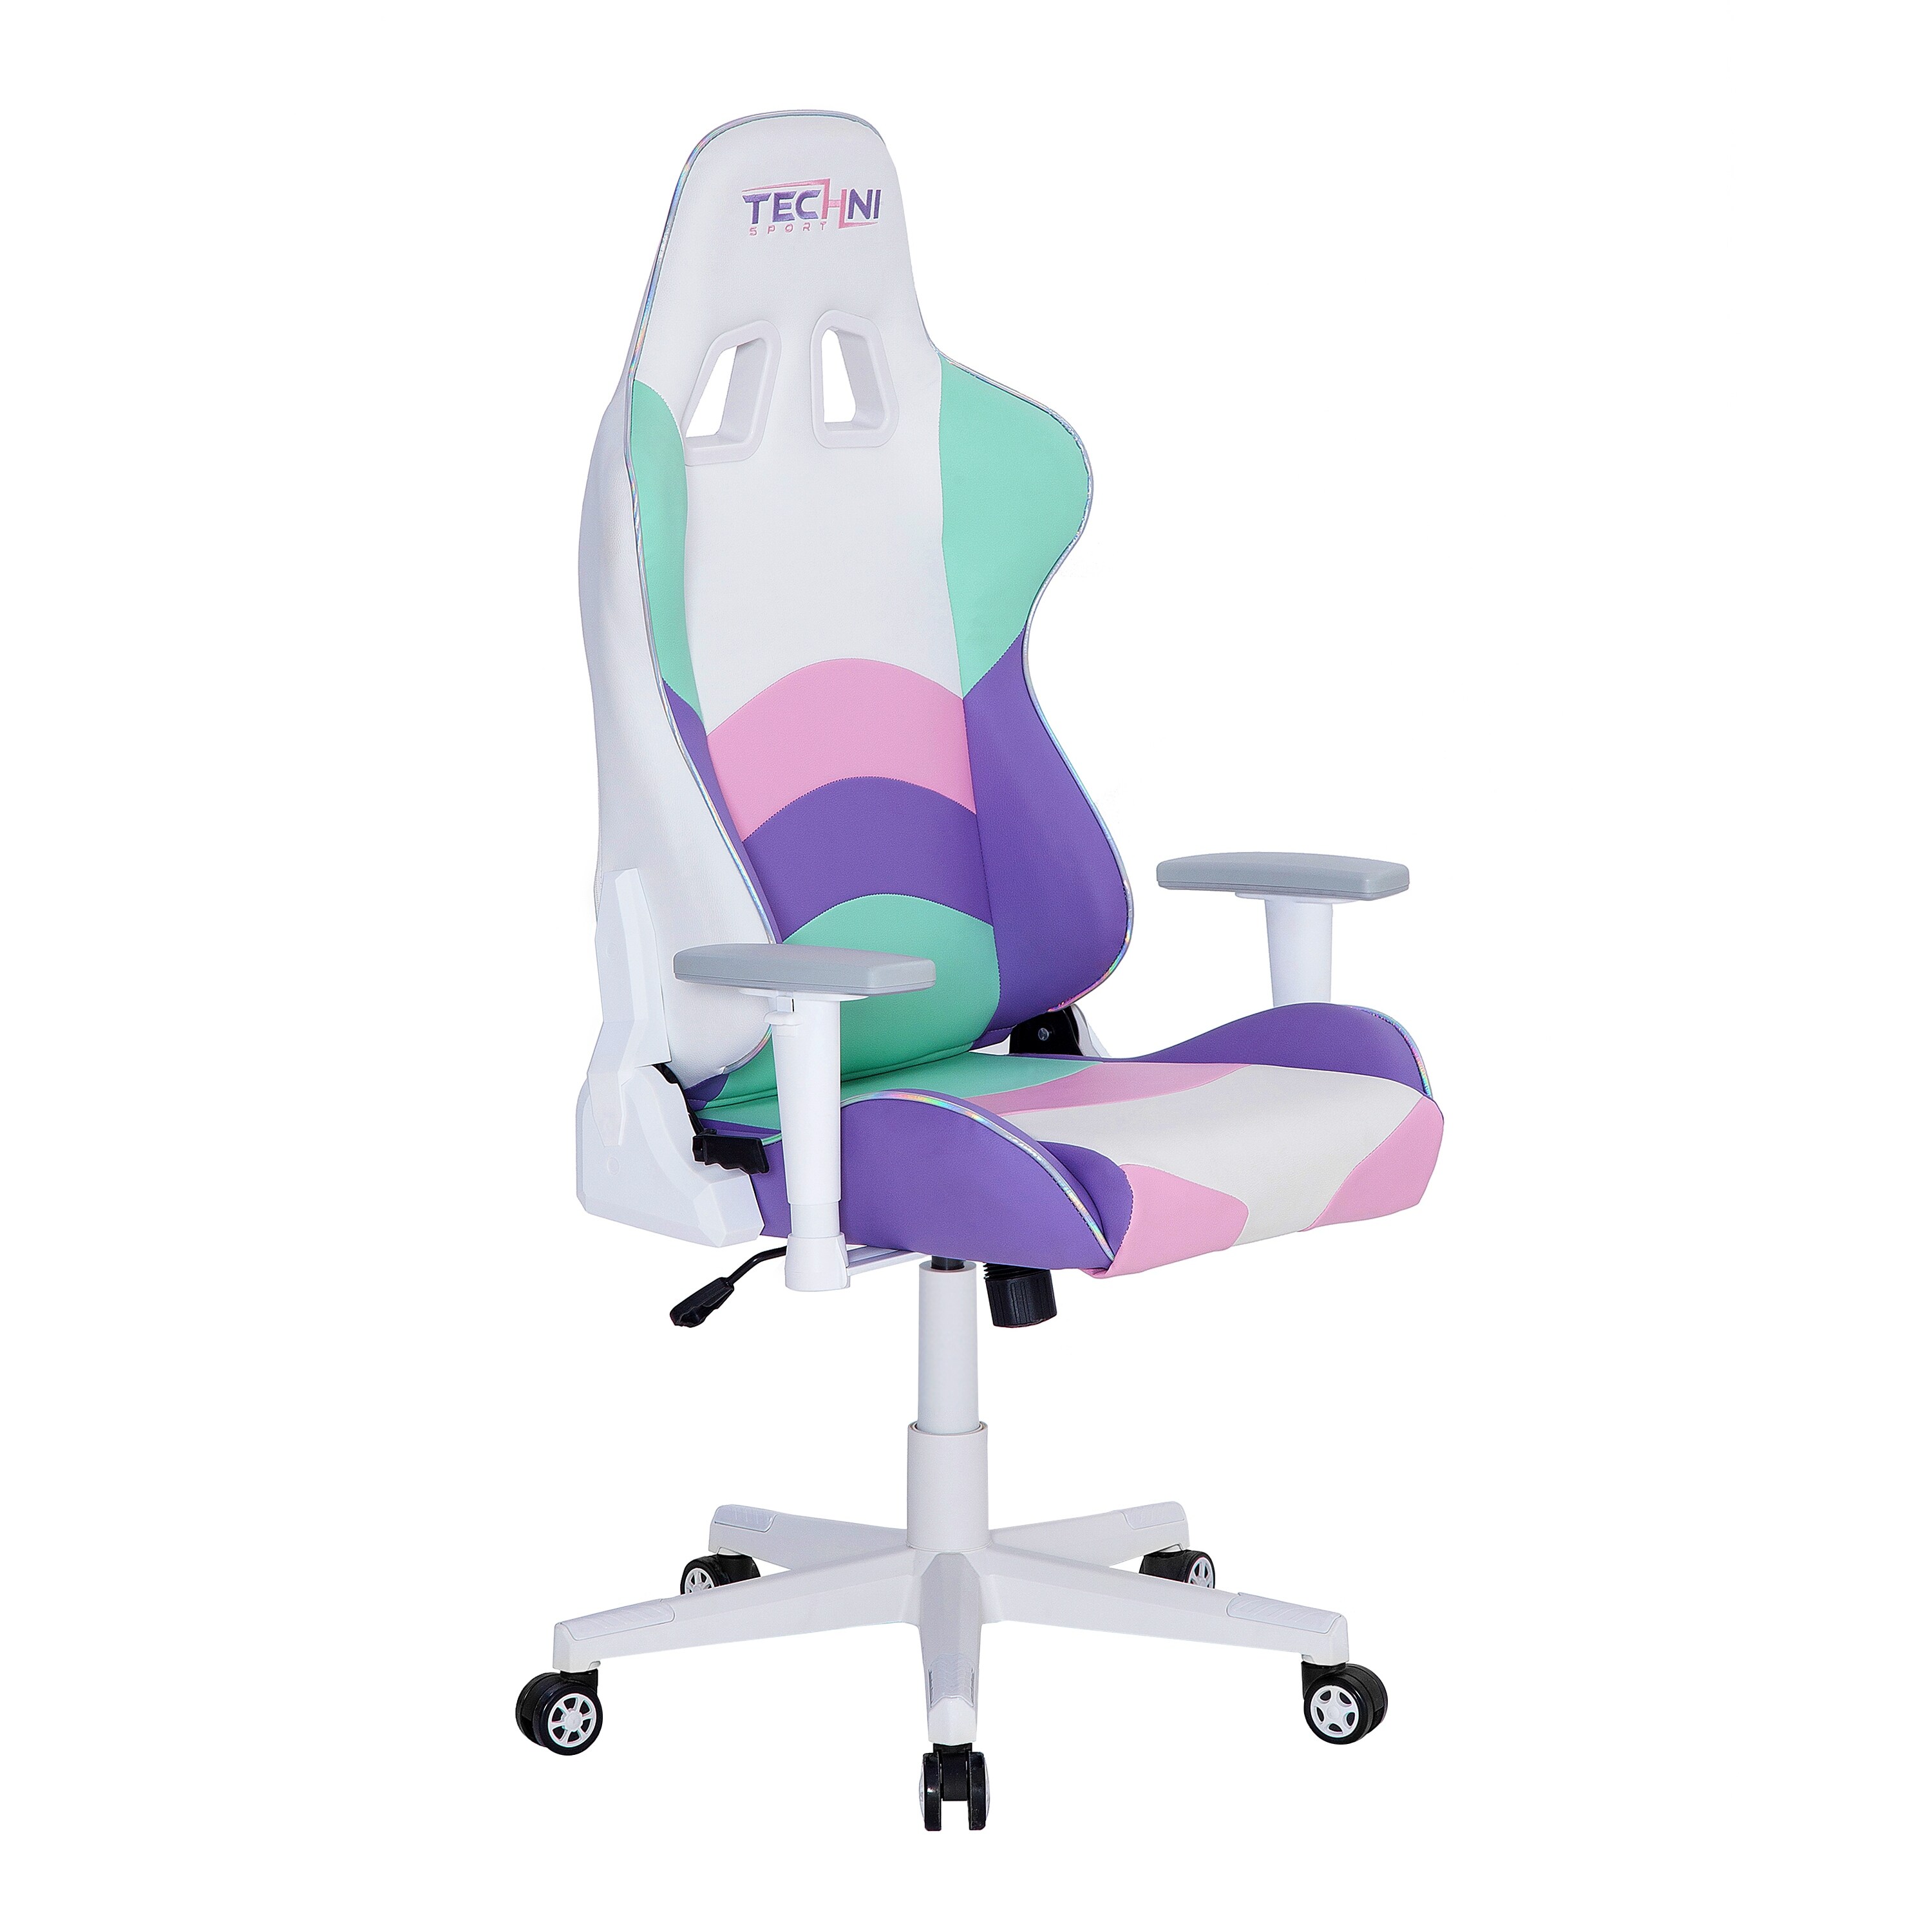 https://ak1.ostkcdn.com/images/products/is/images/direct/1fe19f9e7e2036341334ba21a838ccc6288bed93/Leather-PC-Gaming-Chair-Adjustable-Neck-Pillow-and-Heart-Shaped-Lumbar-Support-Cushion-Office-Chair-with-Nylon-Base-%26-Casters.jpg